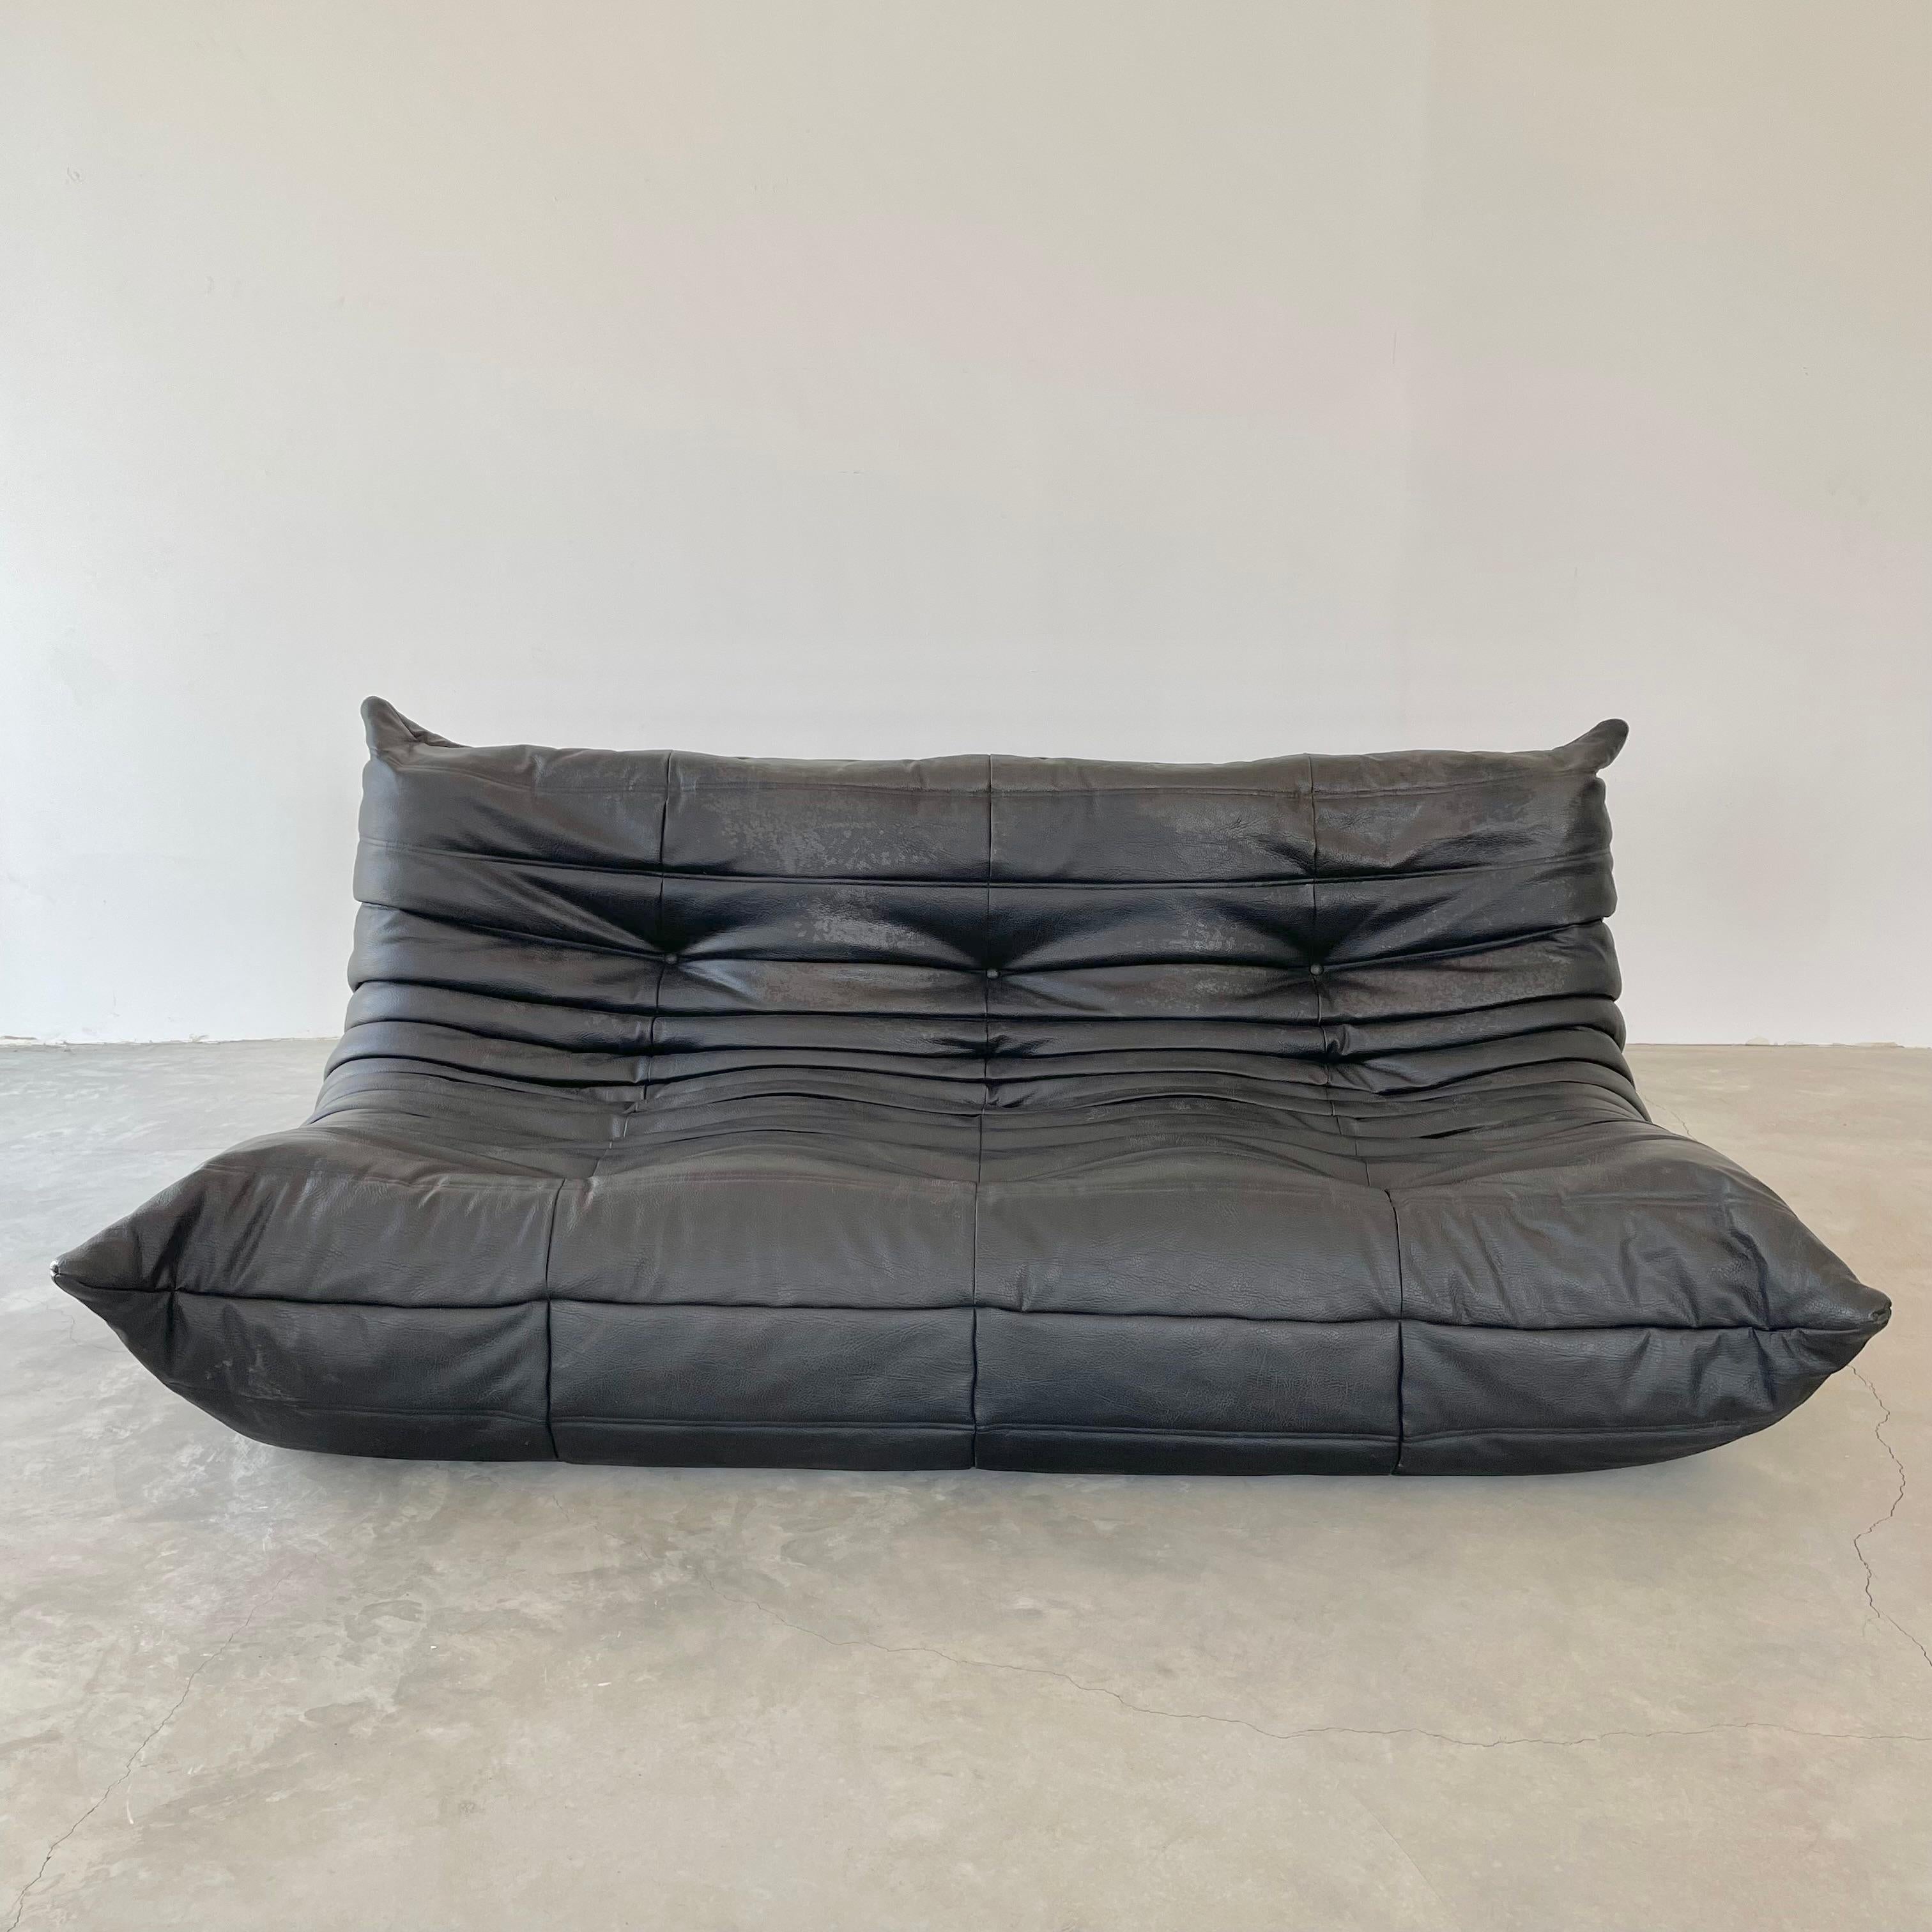 Classic French 3 seat Togo sofa by Michel Ducaroy for luxury brand Ligne Roset. Originally designed in the 1970s the iconic togo sofa is now a design classic. This sofa comes in its original vintage pebbled black leather.

Timeless comfort and